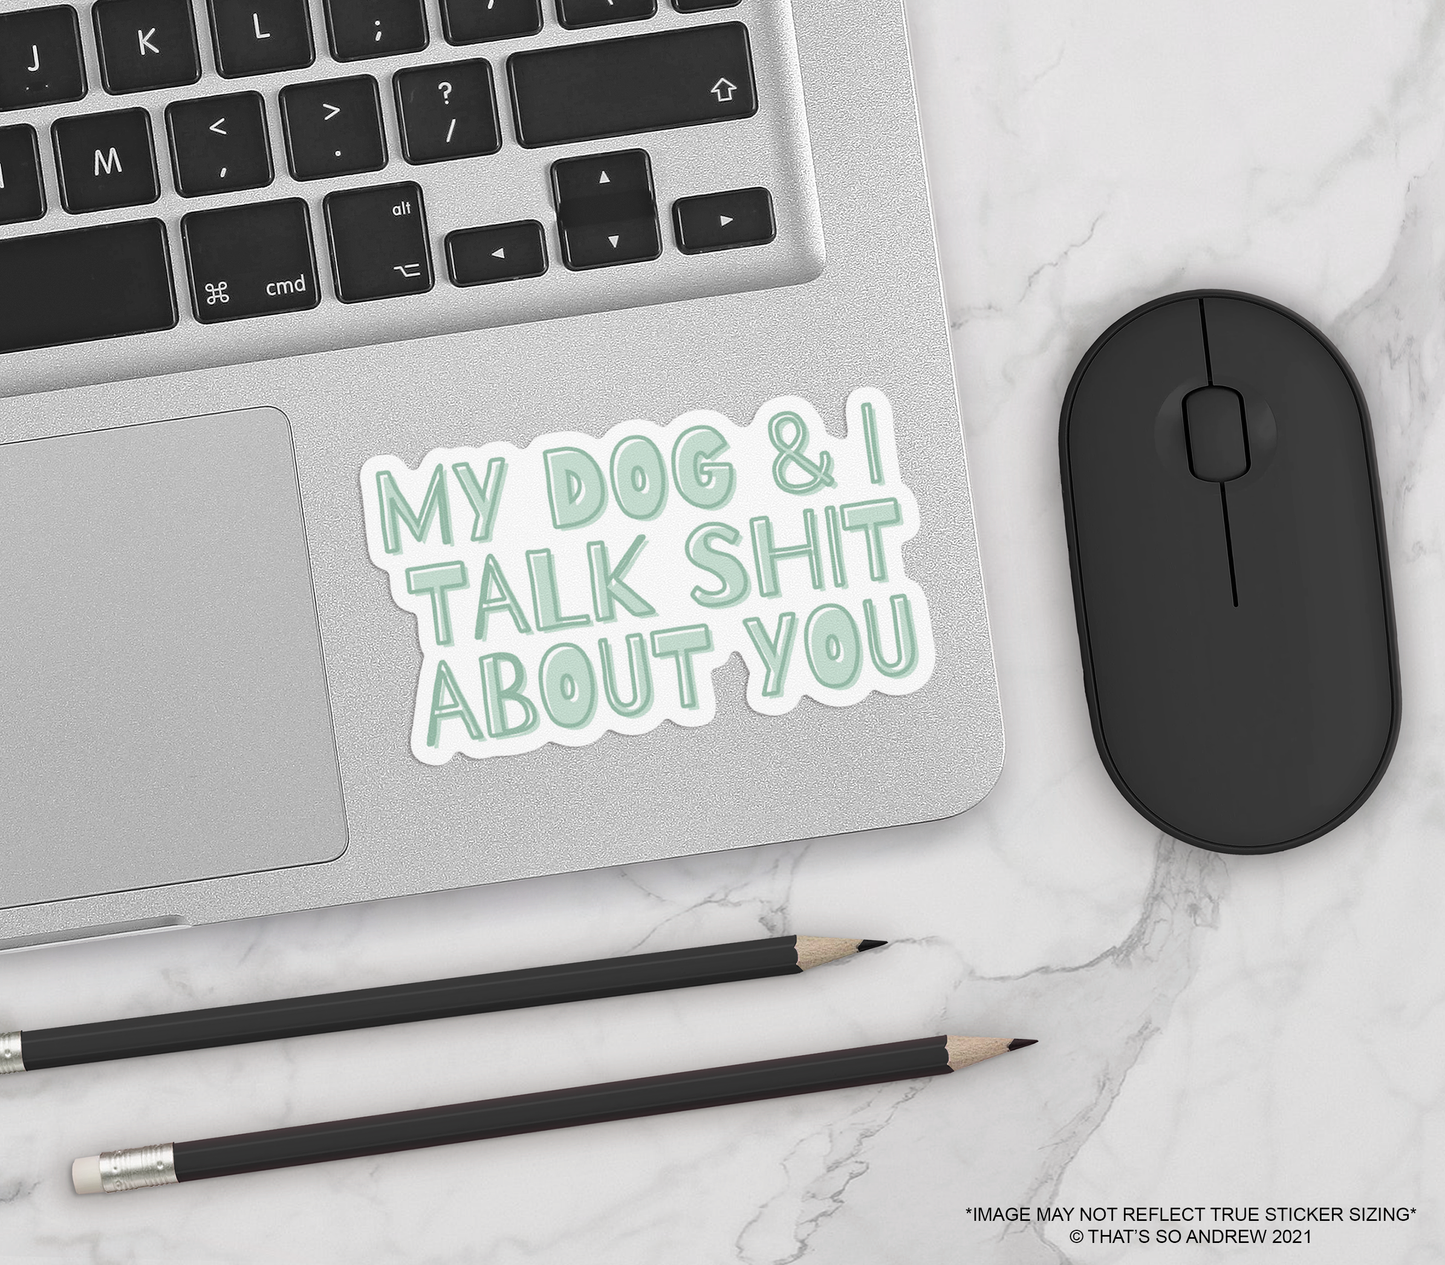 My Dog and I Talk Shit About You Sticker